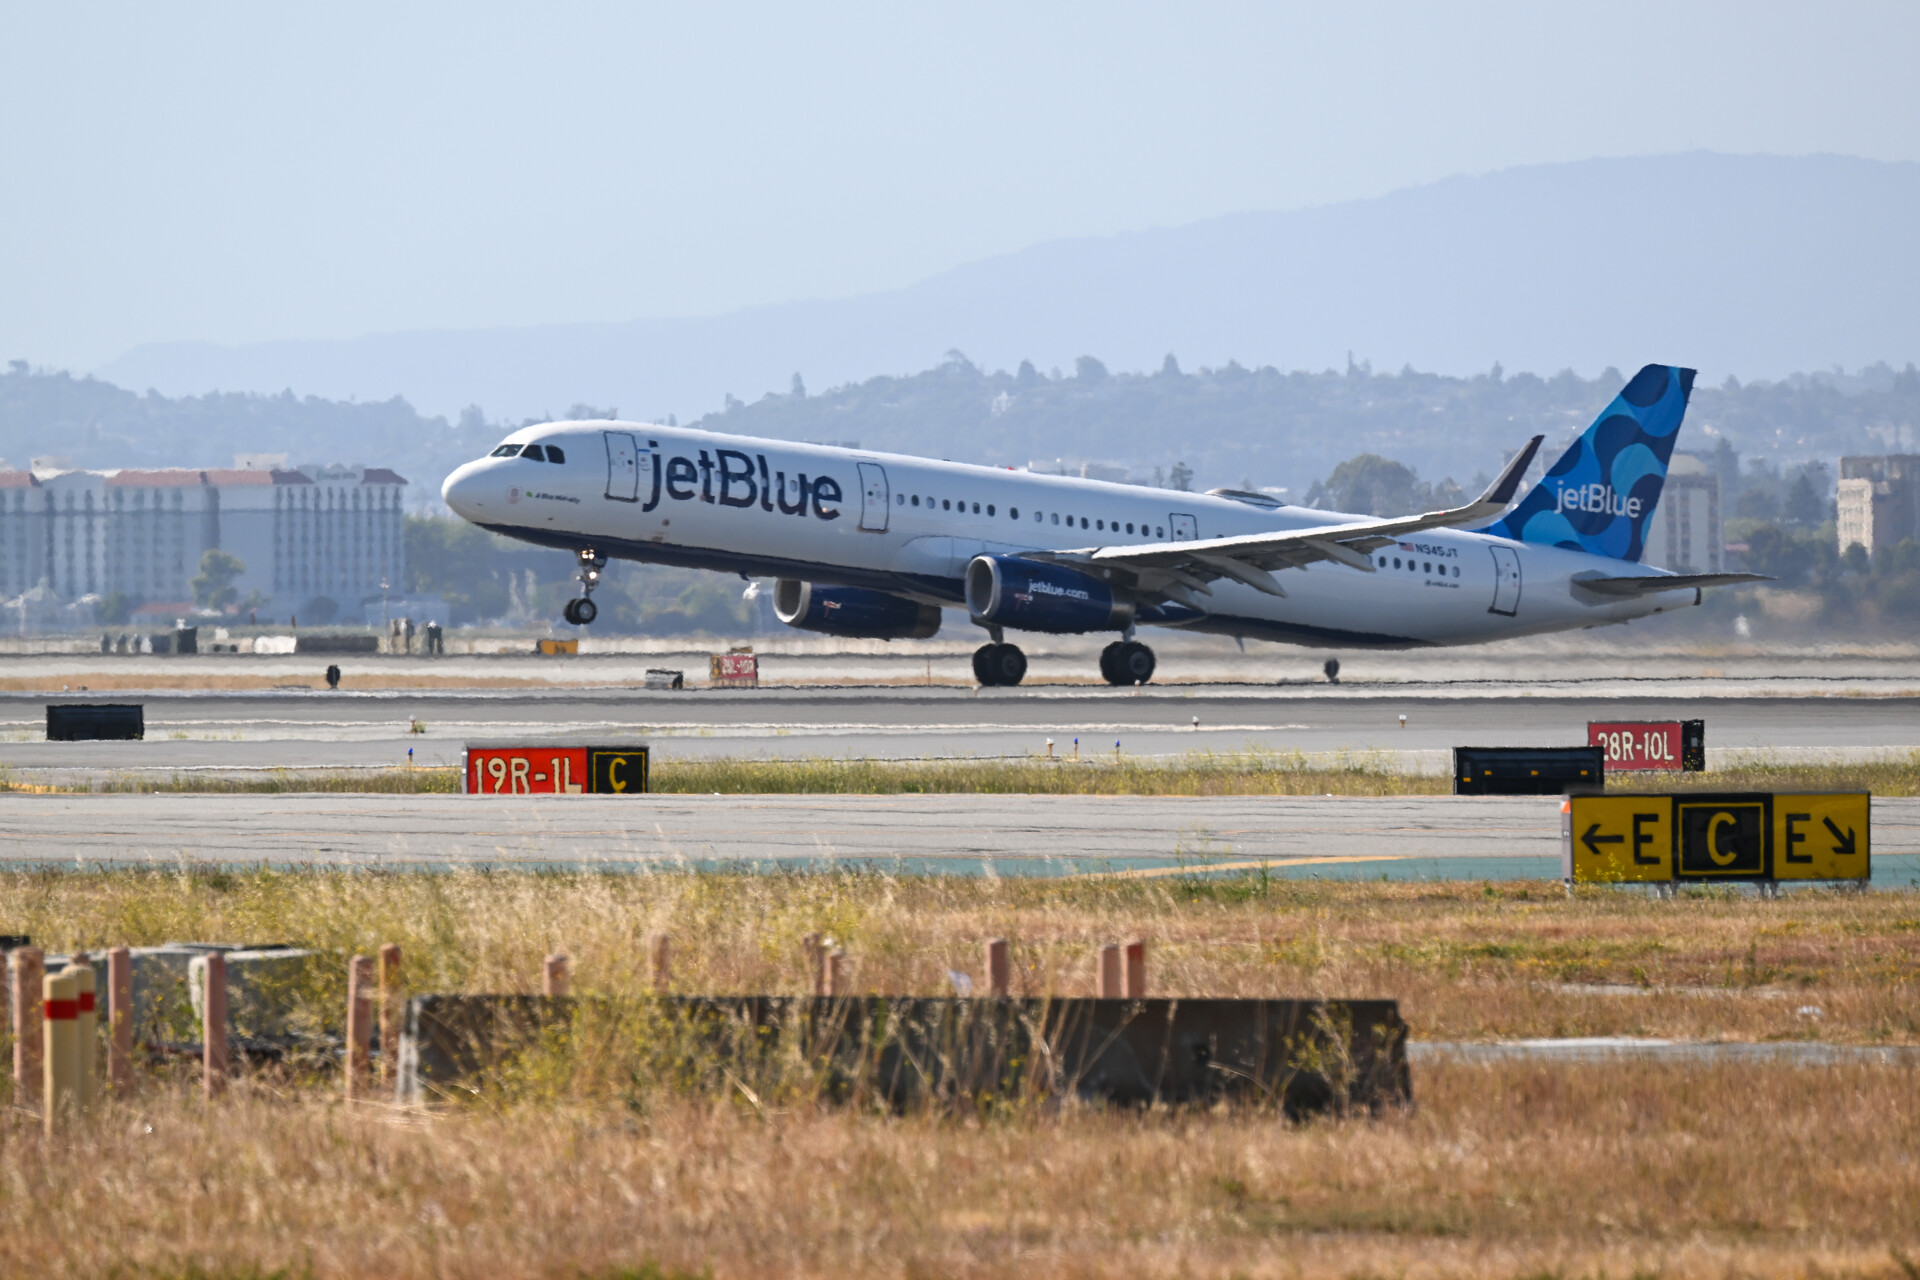 A passenger jet with JETBLUE on the side takes off from a runway.